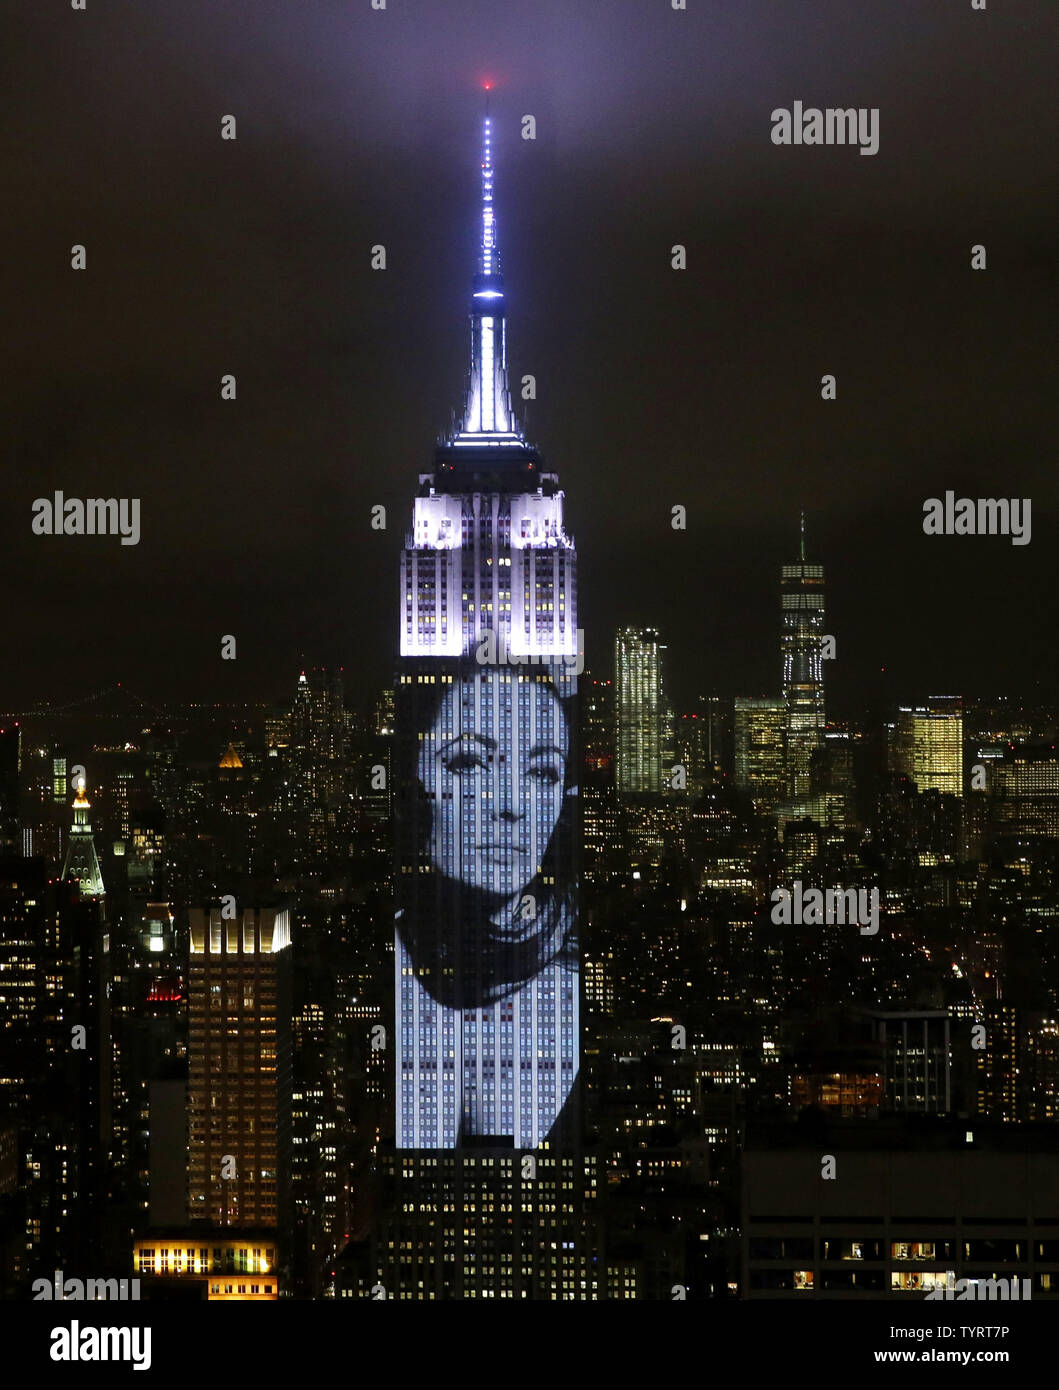 An artist rendering image of Elizabeth Taylor is projected onto the Empire State Building in the Manhattan skyline to celebrate Harper Bazaar's 150th anniversary on April 19, 2017 in New York City. Spanning 42 floors of the building and rising 500 feet high, the show featured iconic fashion images of everyone from Audrey Hepburn to Kate Moss, including iconic works by the likes of Andy Warhol.     Photo by John Angelillo/UPI Stock Photo